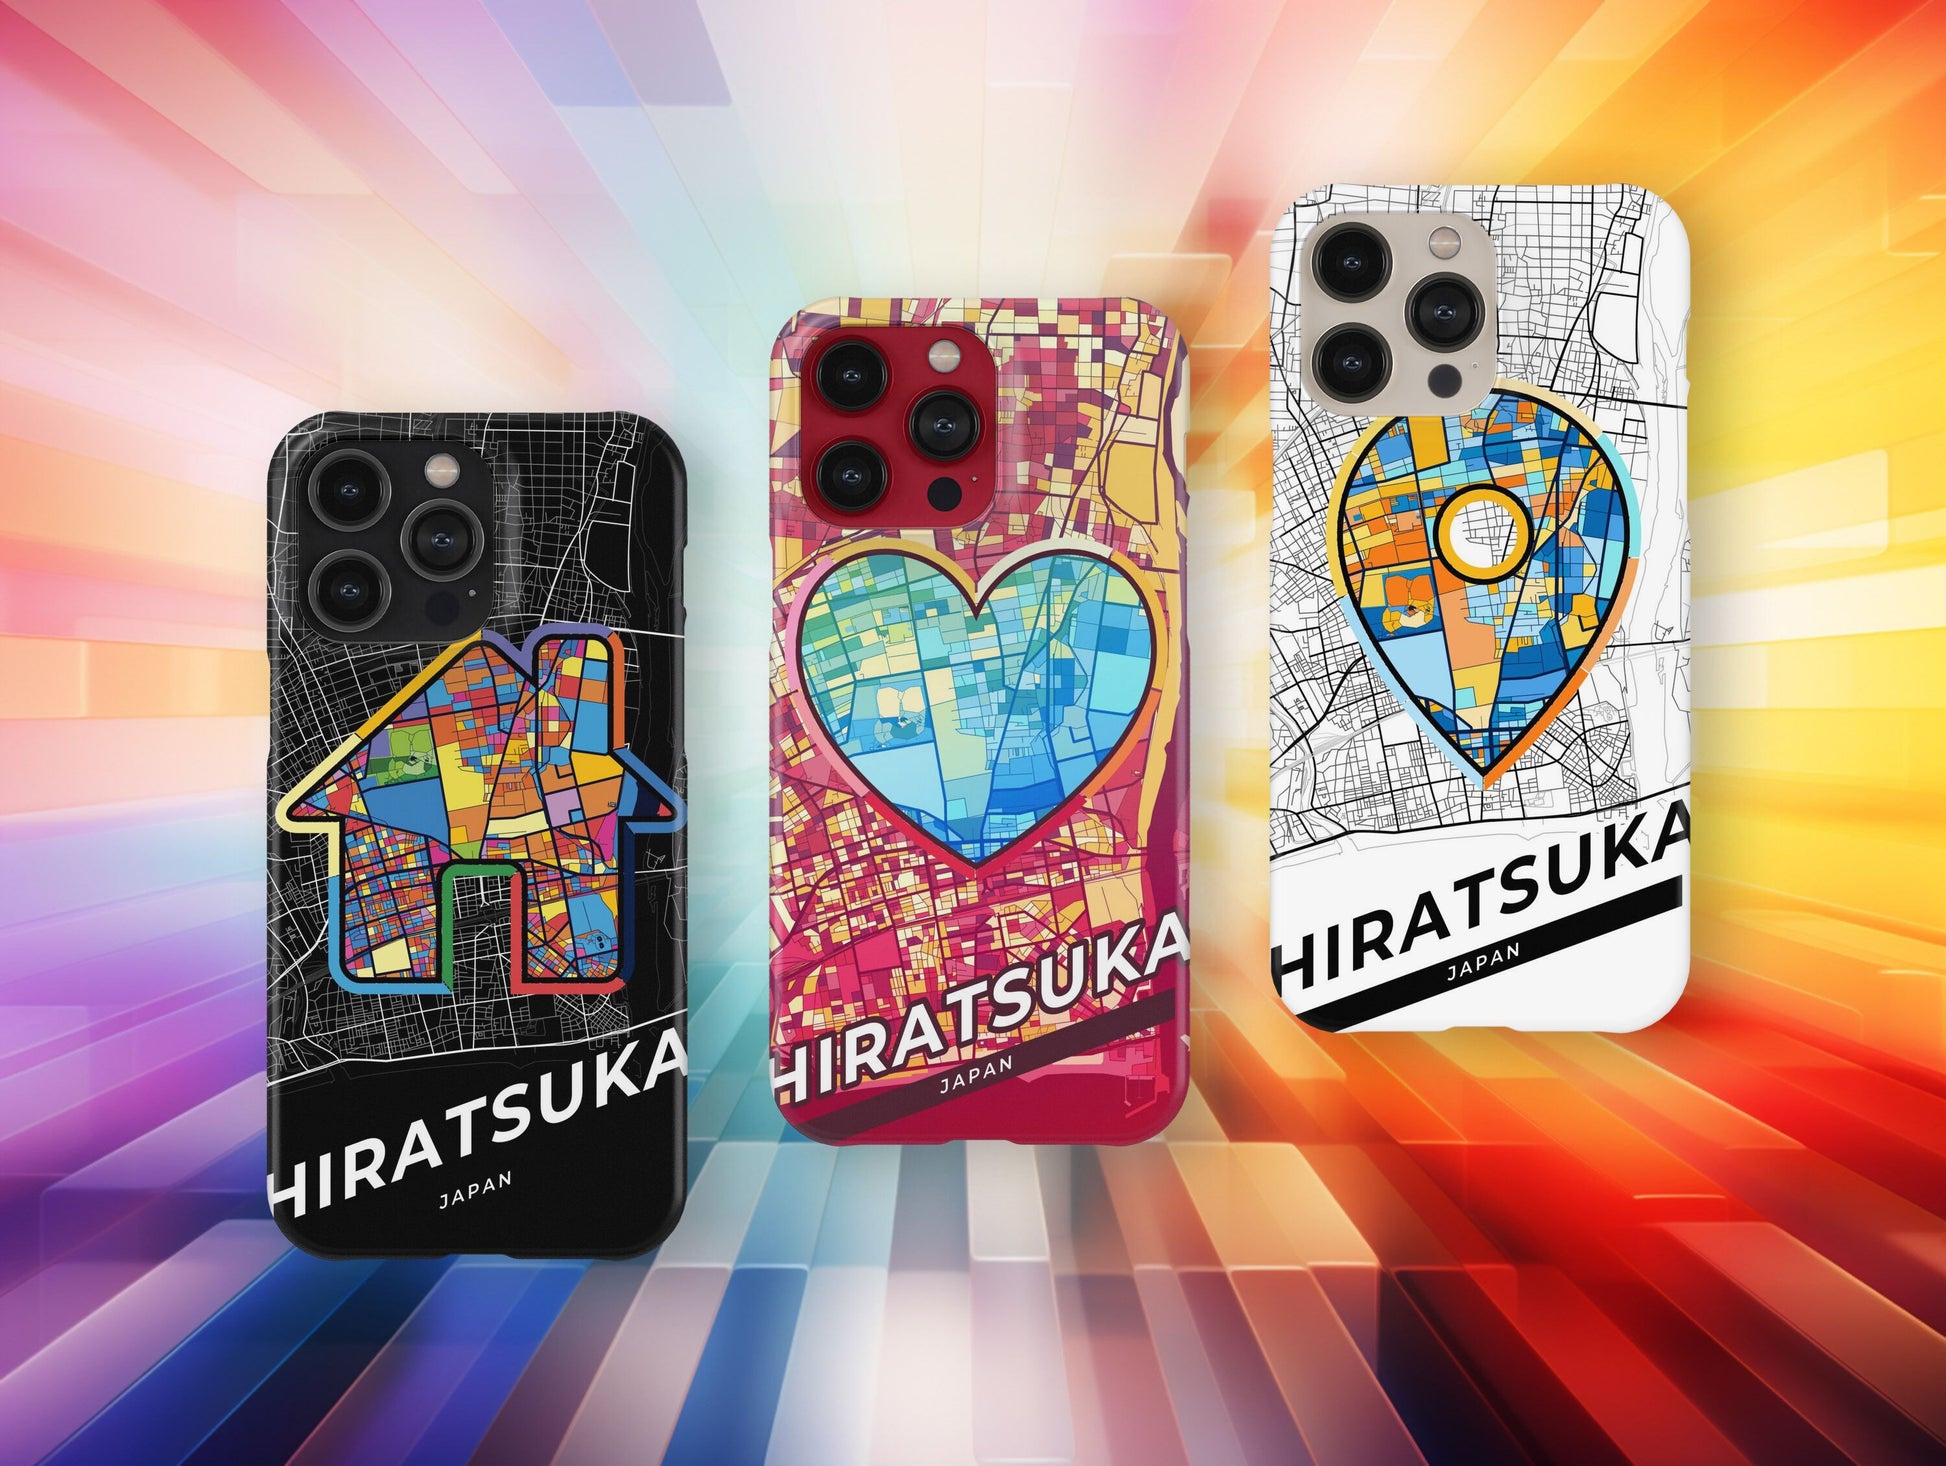 Hiratsuka Japan slim phone case with colorful icon. Birthday, wedding or housewarming gift. Couple match cases.